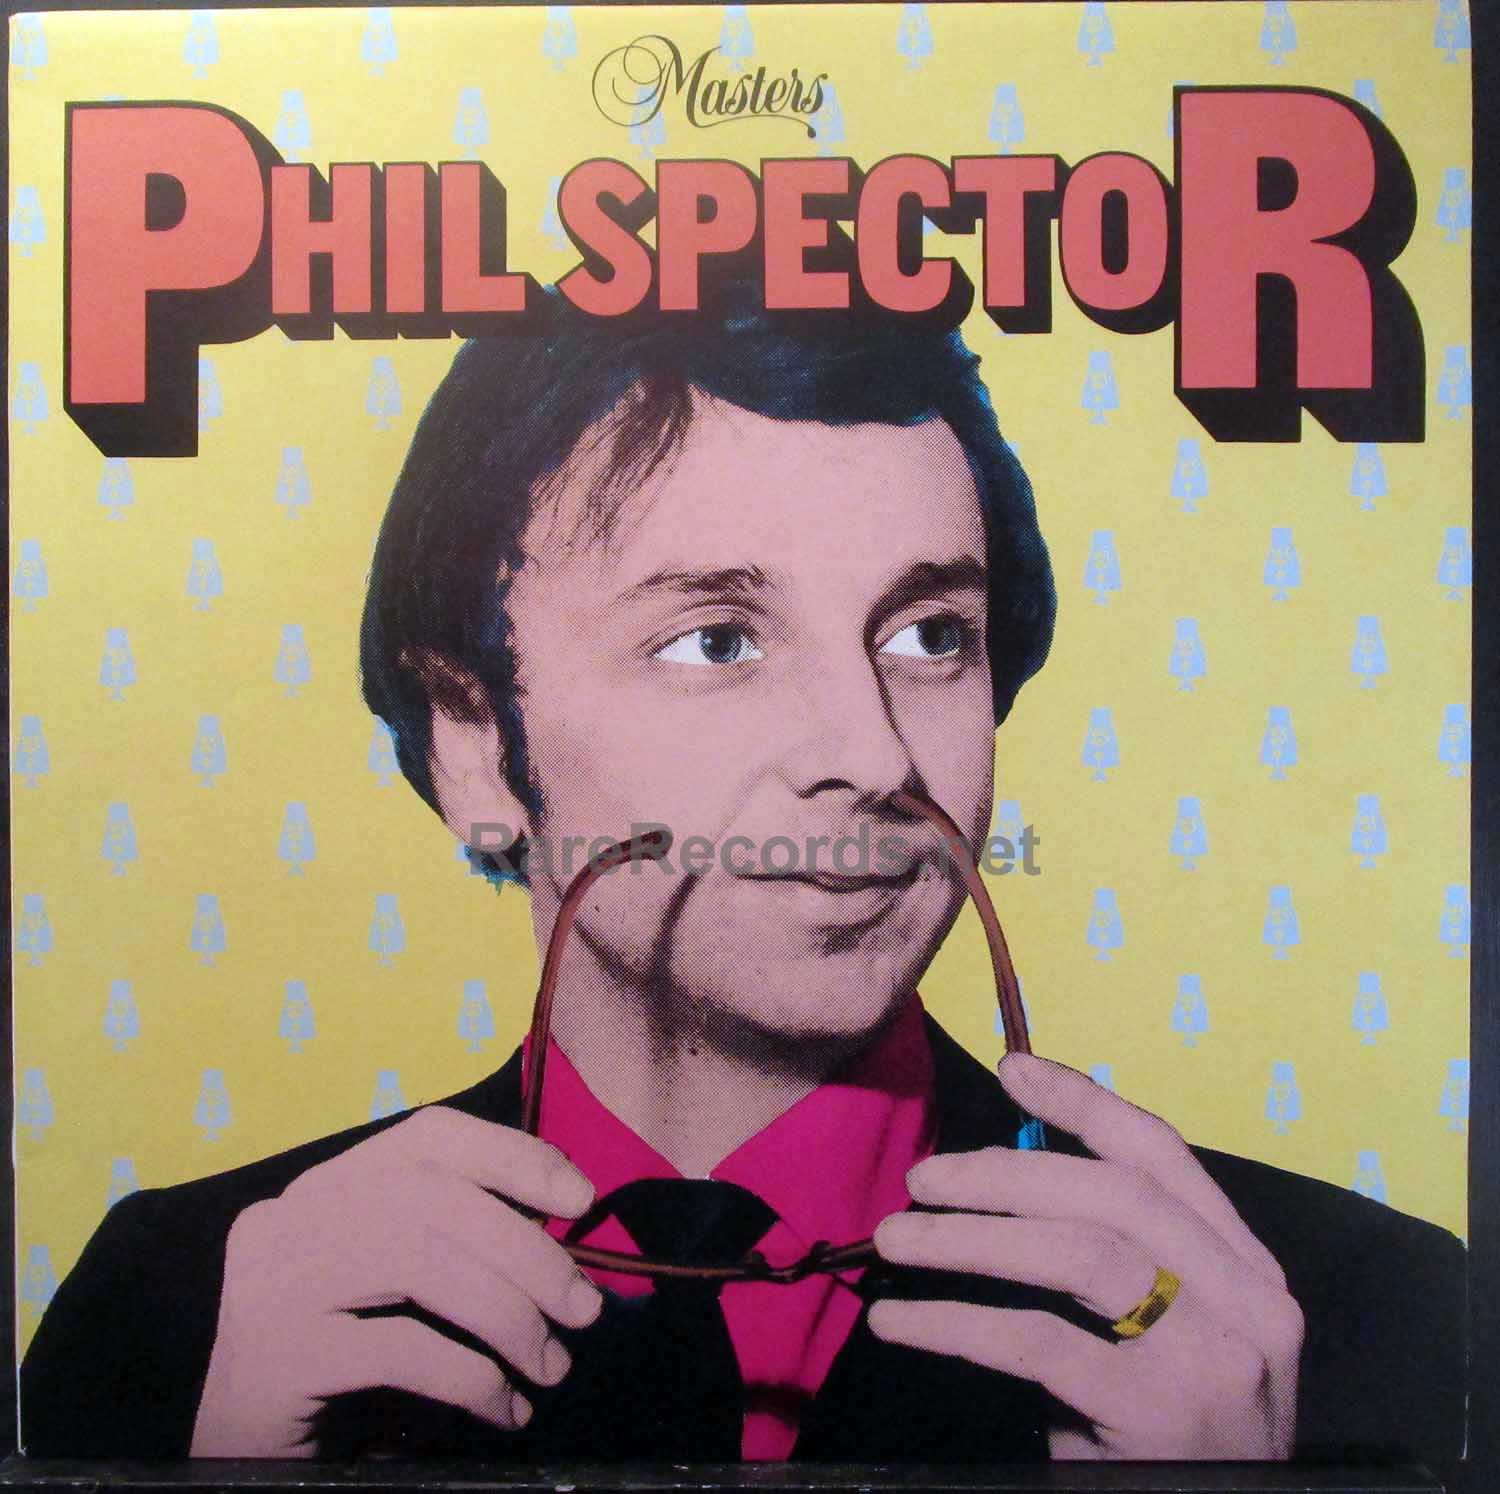 Phil Spector - Wall of Sound 1981 UK 9 LP box set with Crystals